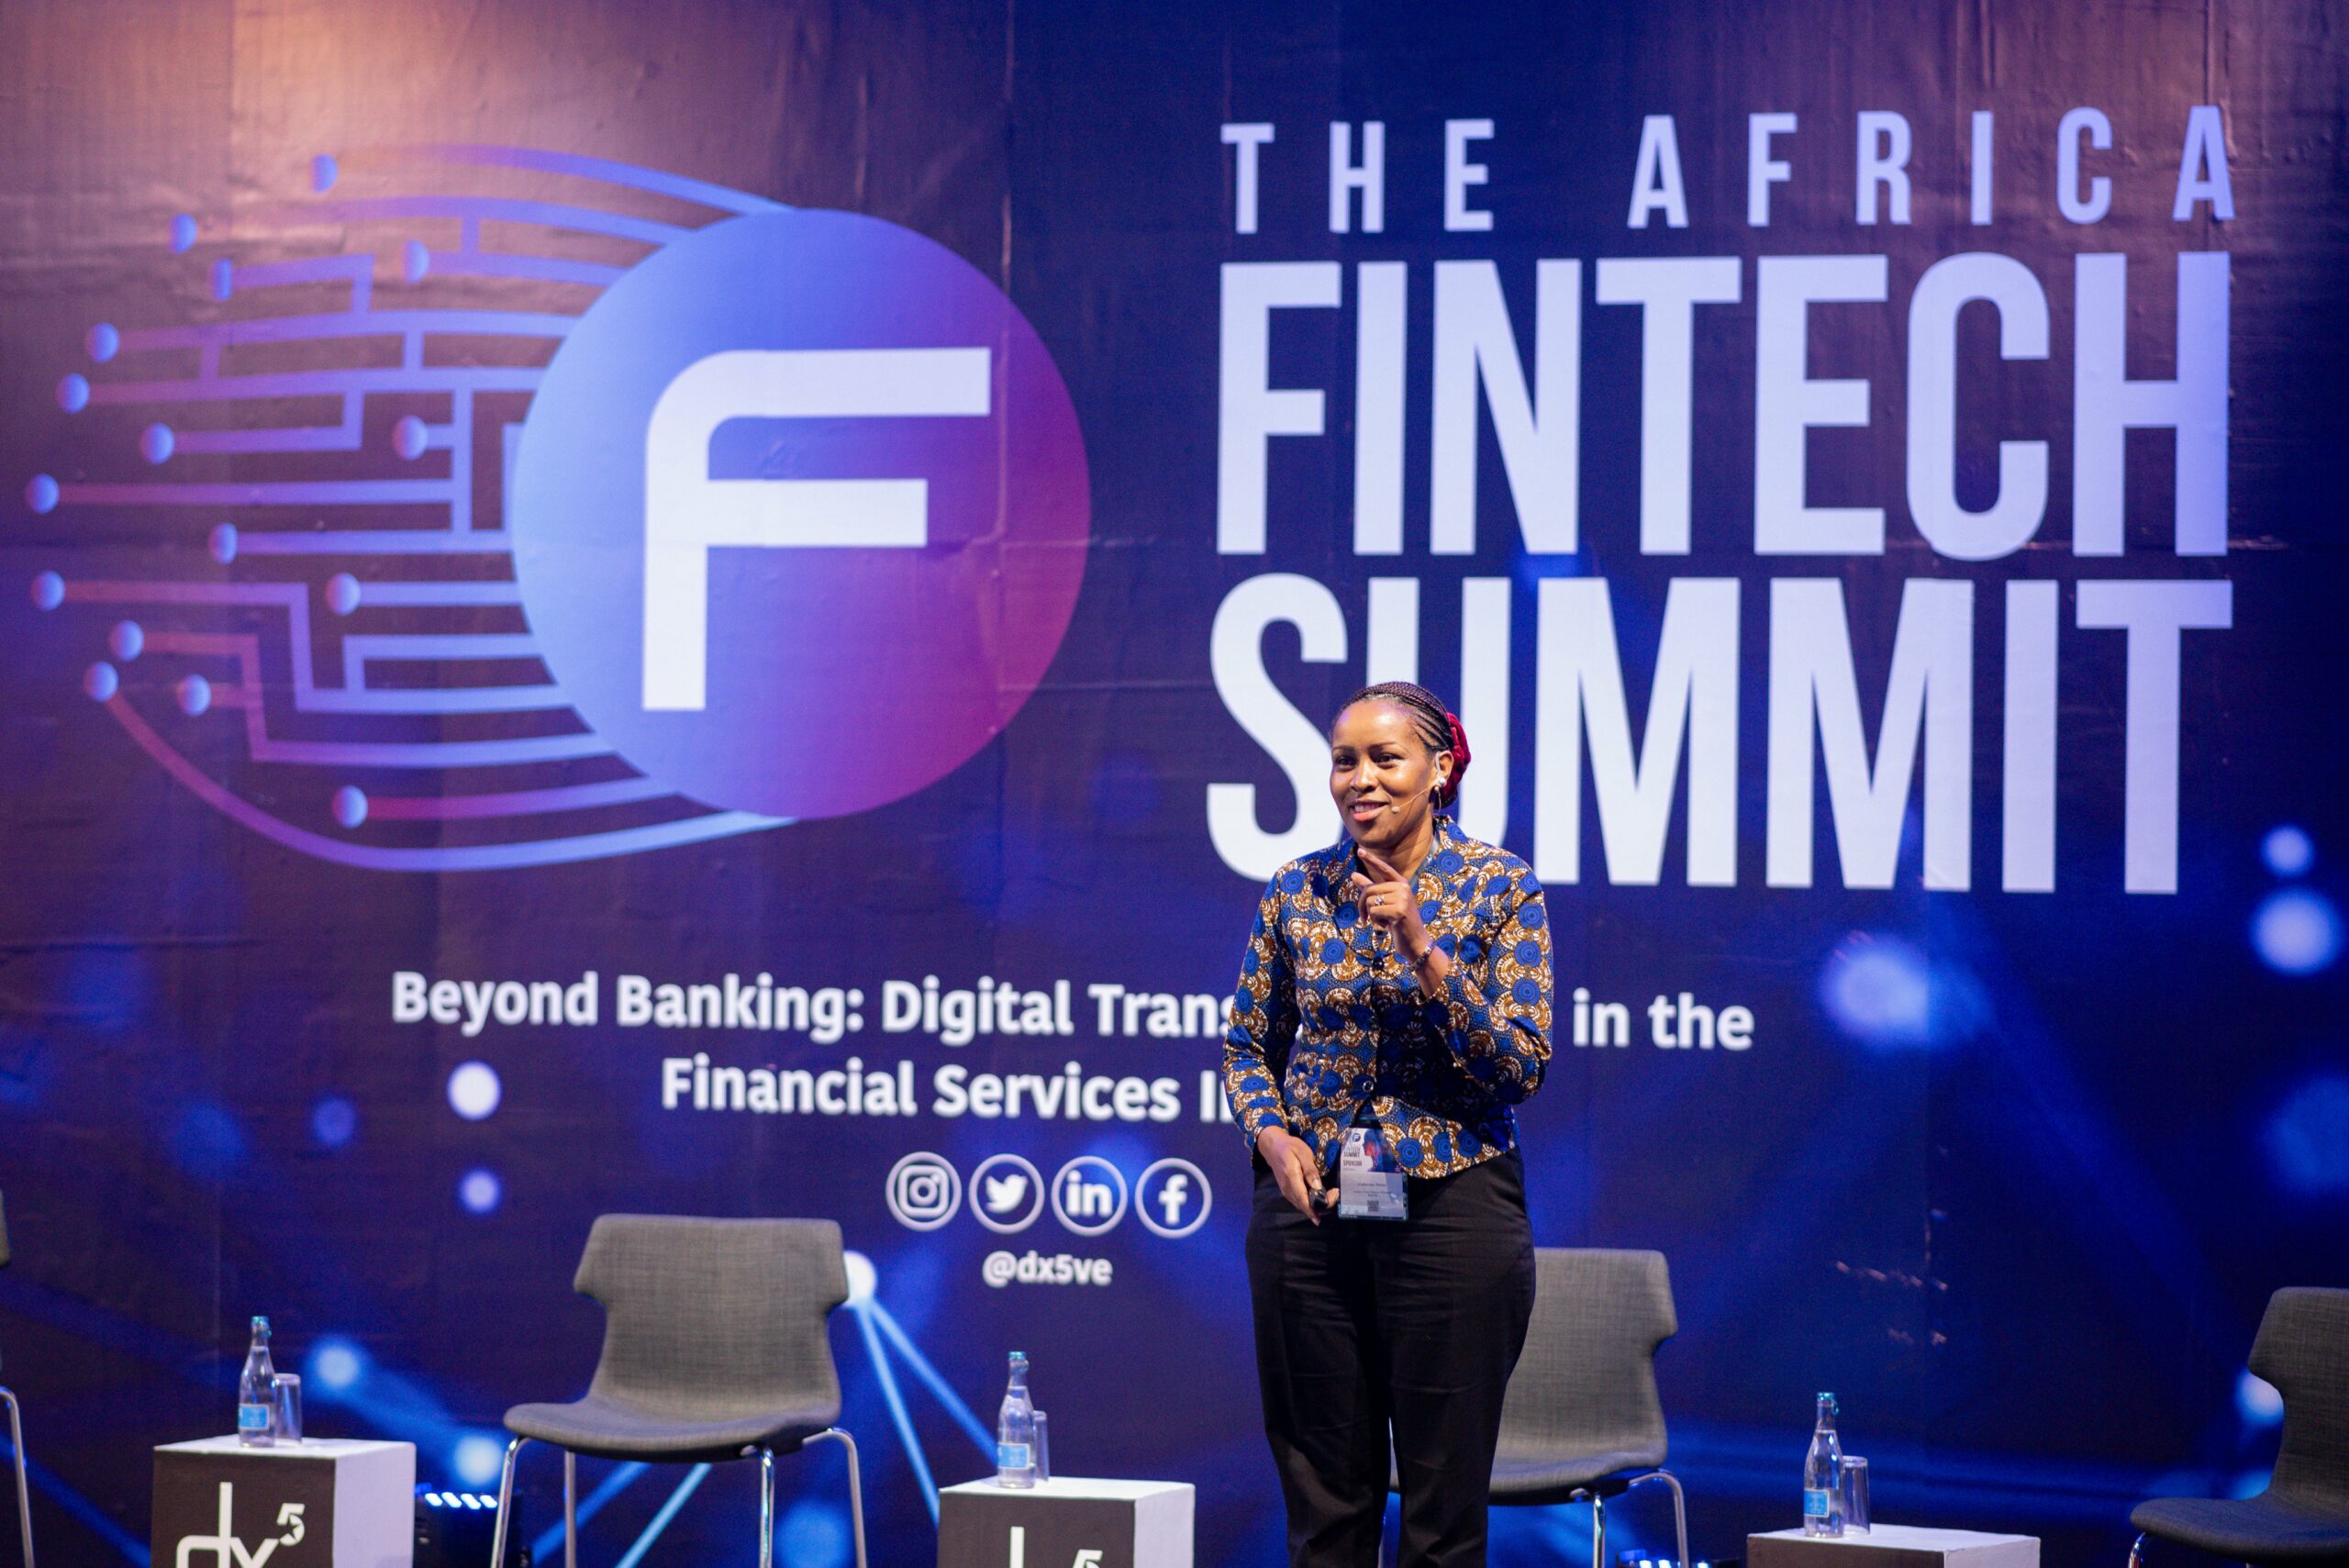 Huawei’s Senior Cloud Solution Manager, Catherine Maina, at the Africa Fintech Summit